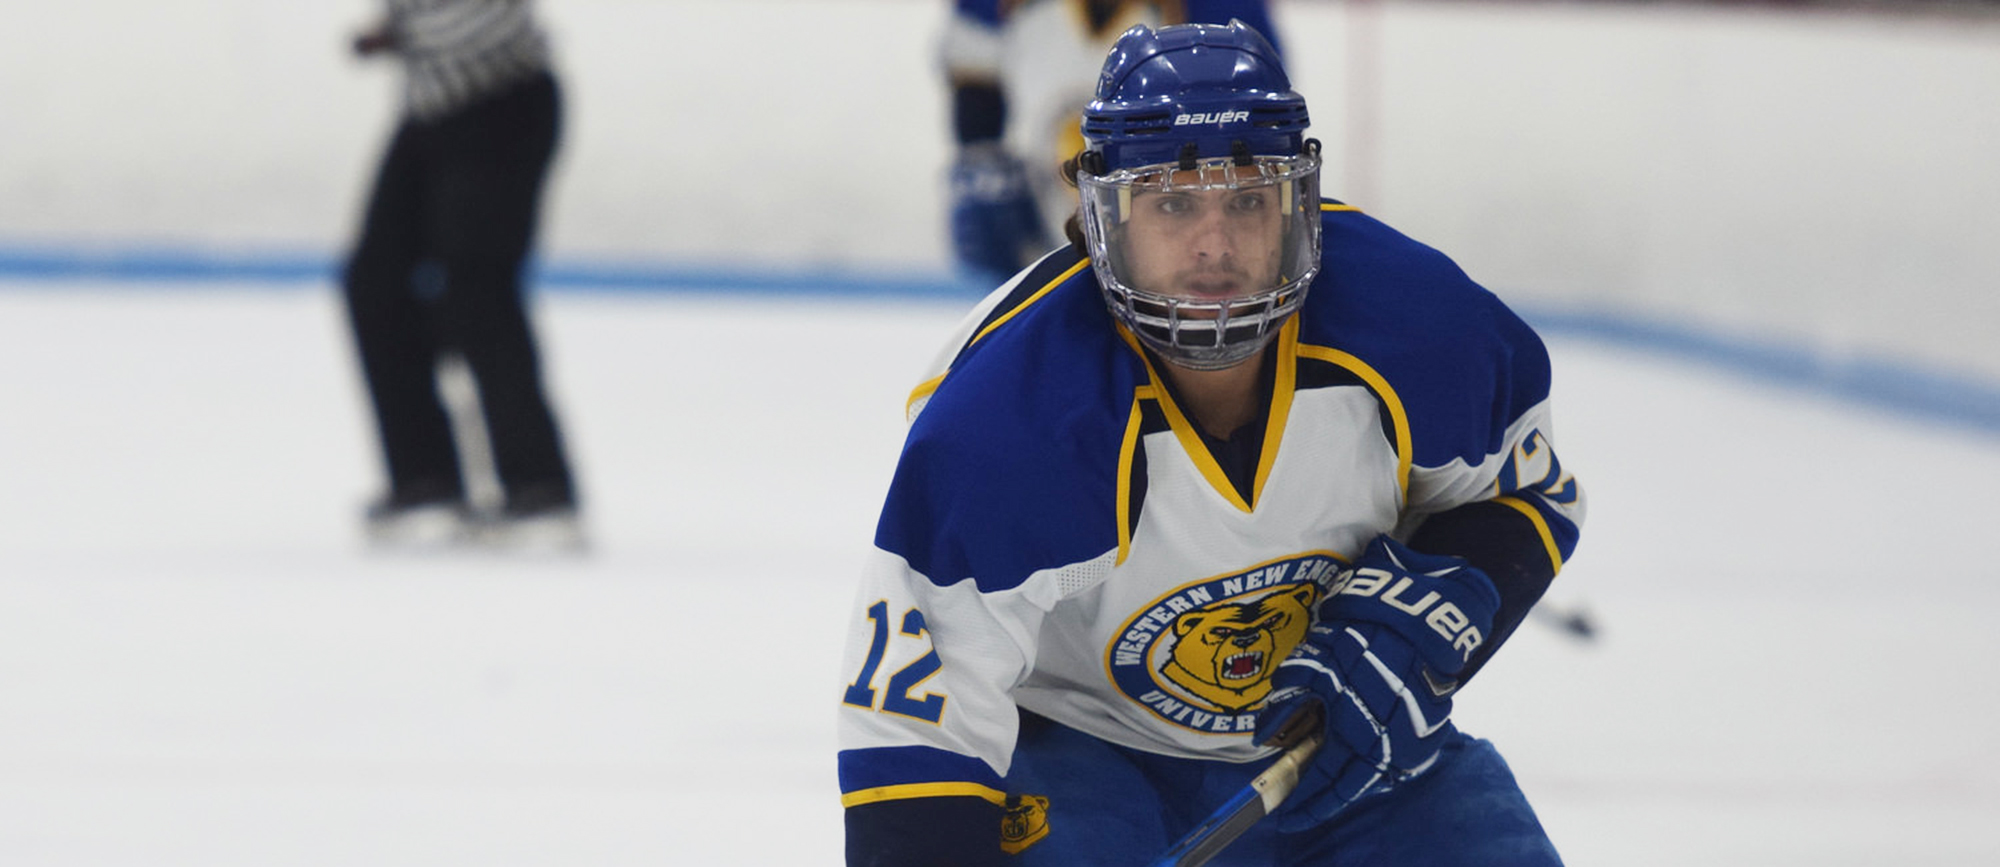 Sophomore Ryan Price was one of three goal scorers for Western New England in the Golden Bears' 6-3 loss to Nichols on Friday. (Photo by Rachael Margossian)